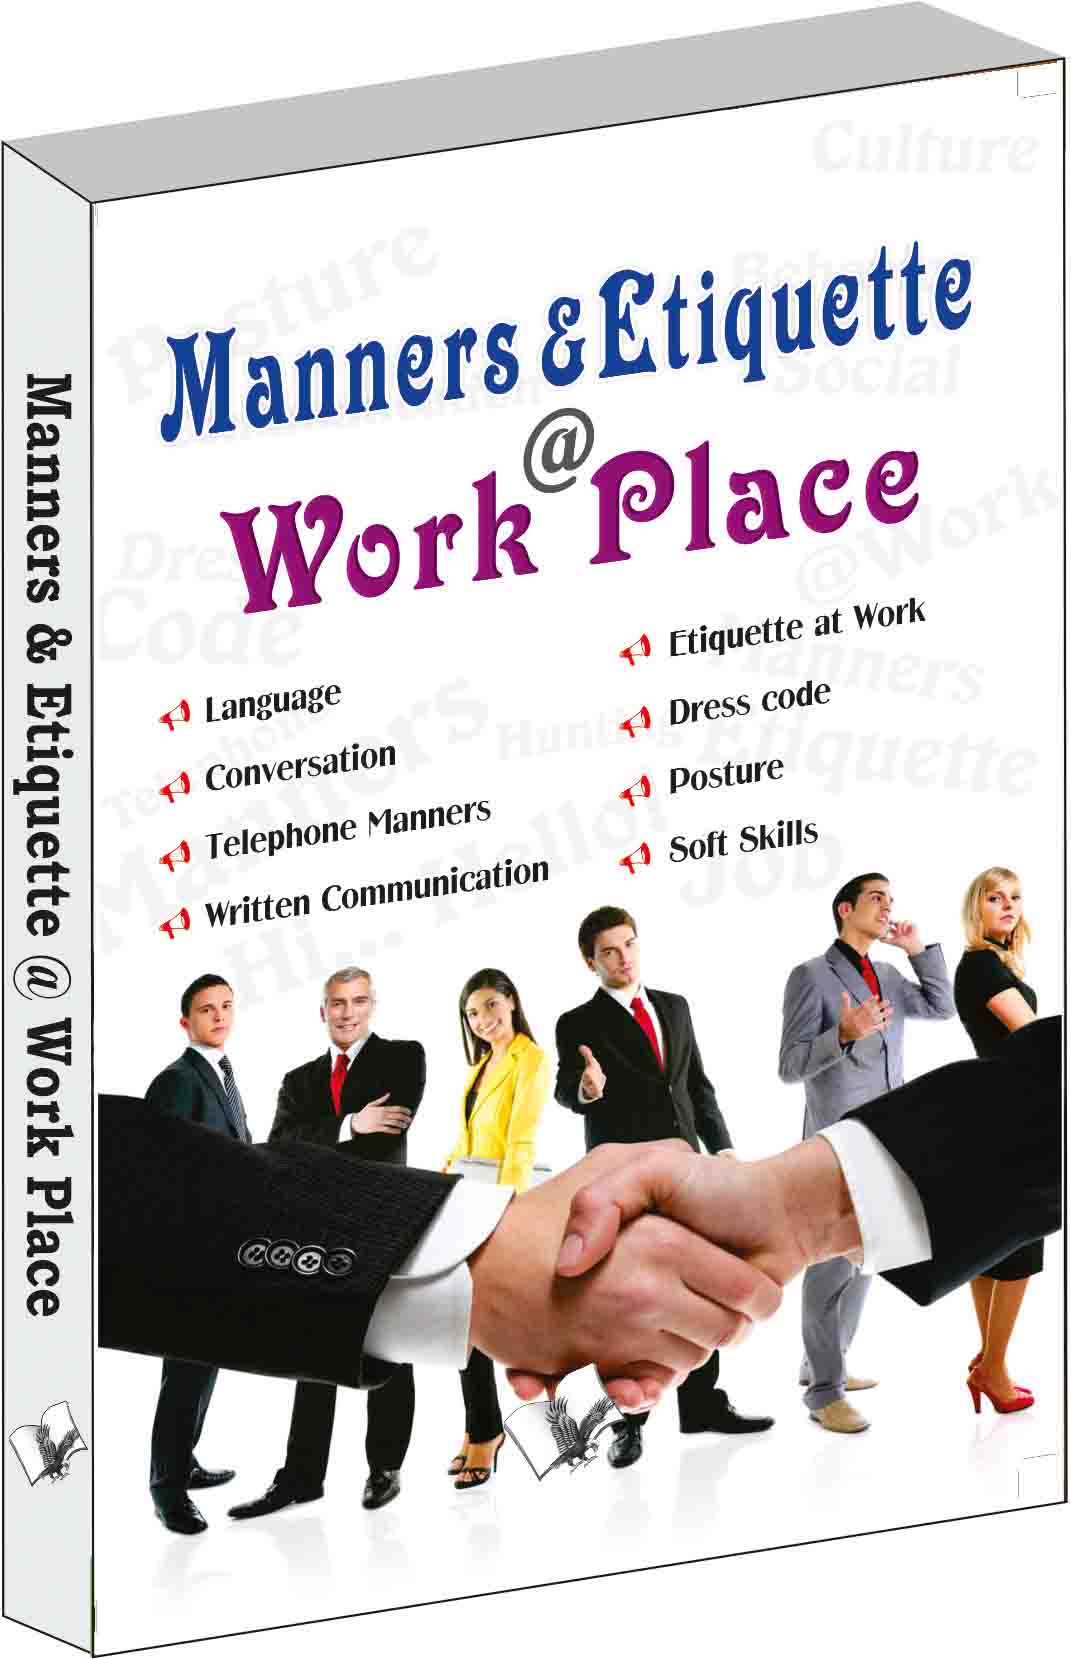 Manners & Etiquette @ work place -What is acceptable & what is not